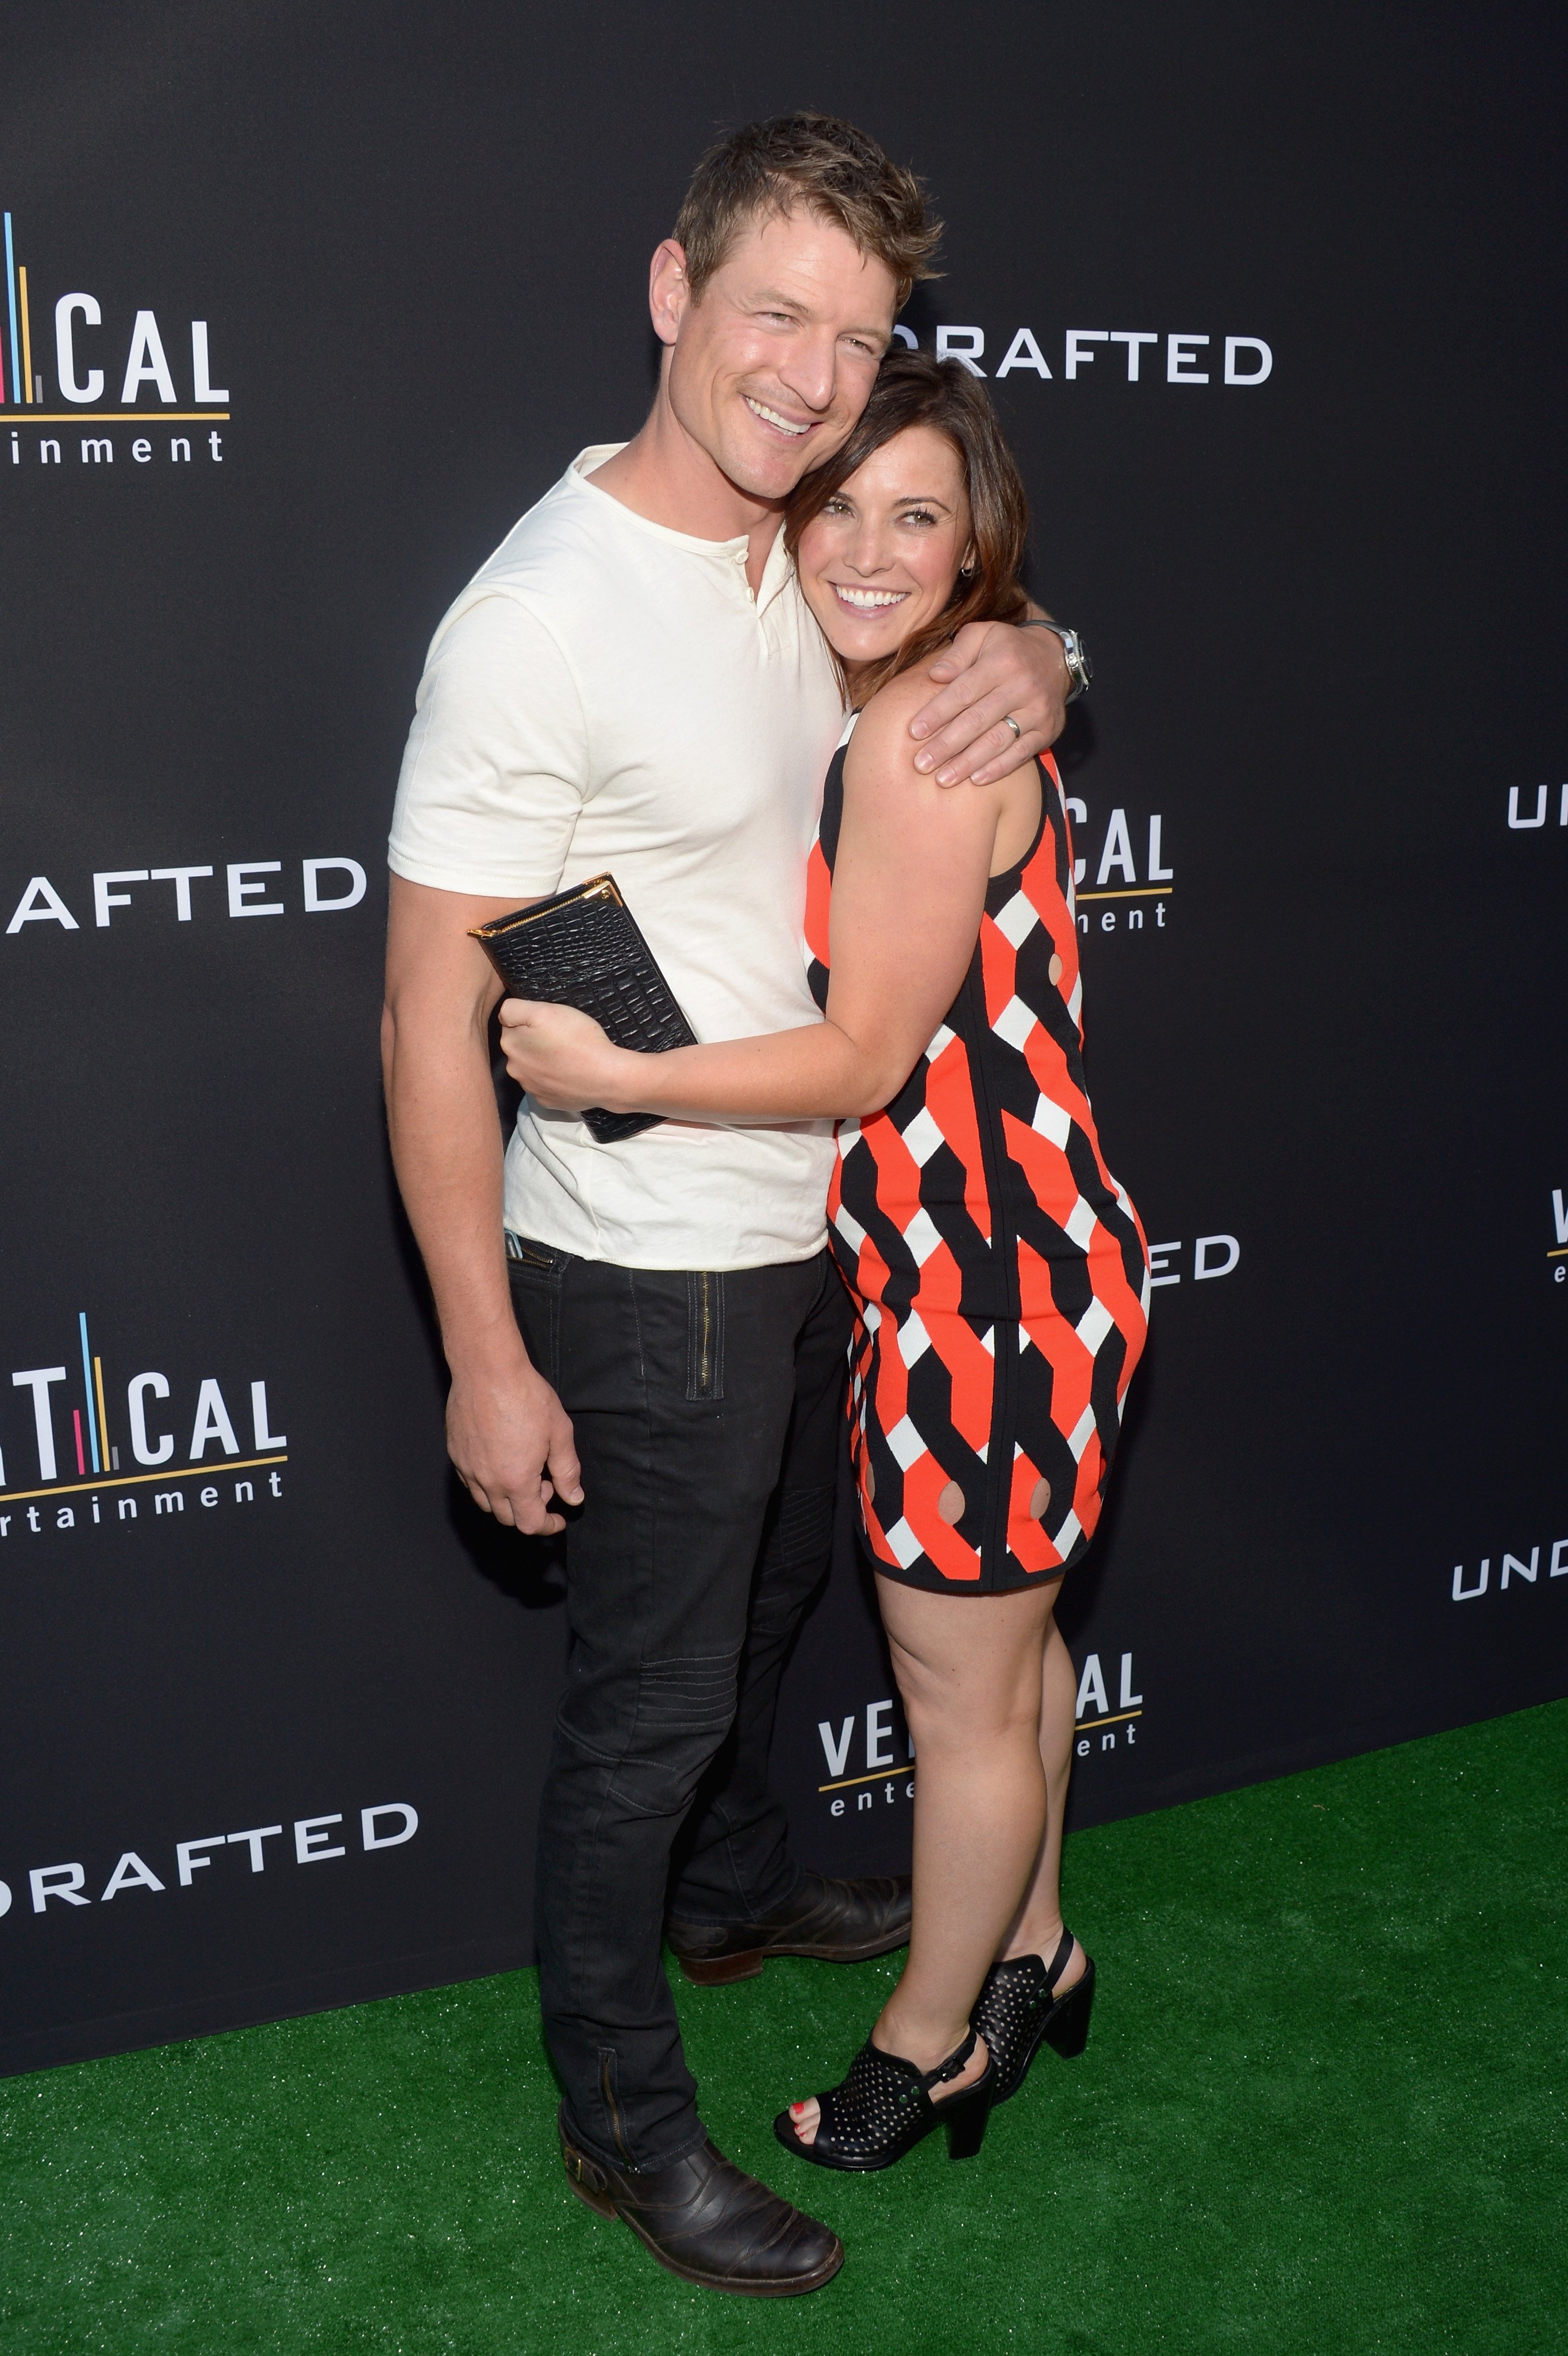 Philip Winchester (L) and Megan Coughlin attend the premiere of Vertical Entertainment's "Undrafted" at ArcLight Hollywood on July 11, 2016, in Hollywood, California. | Source: Getty Images.